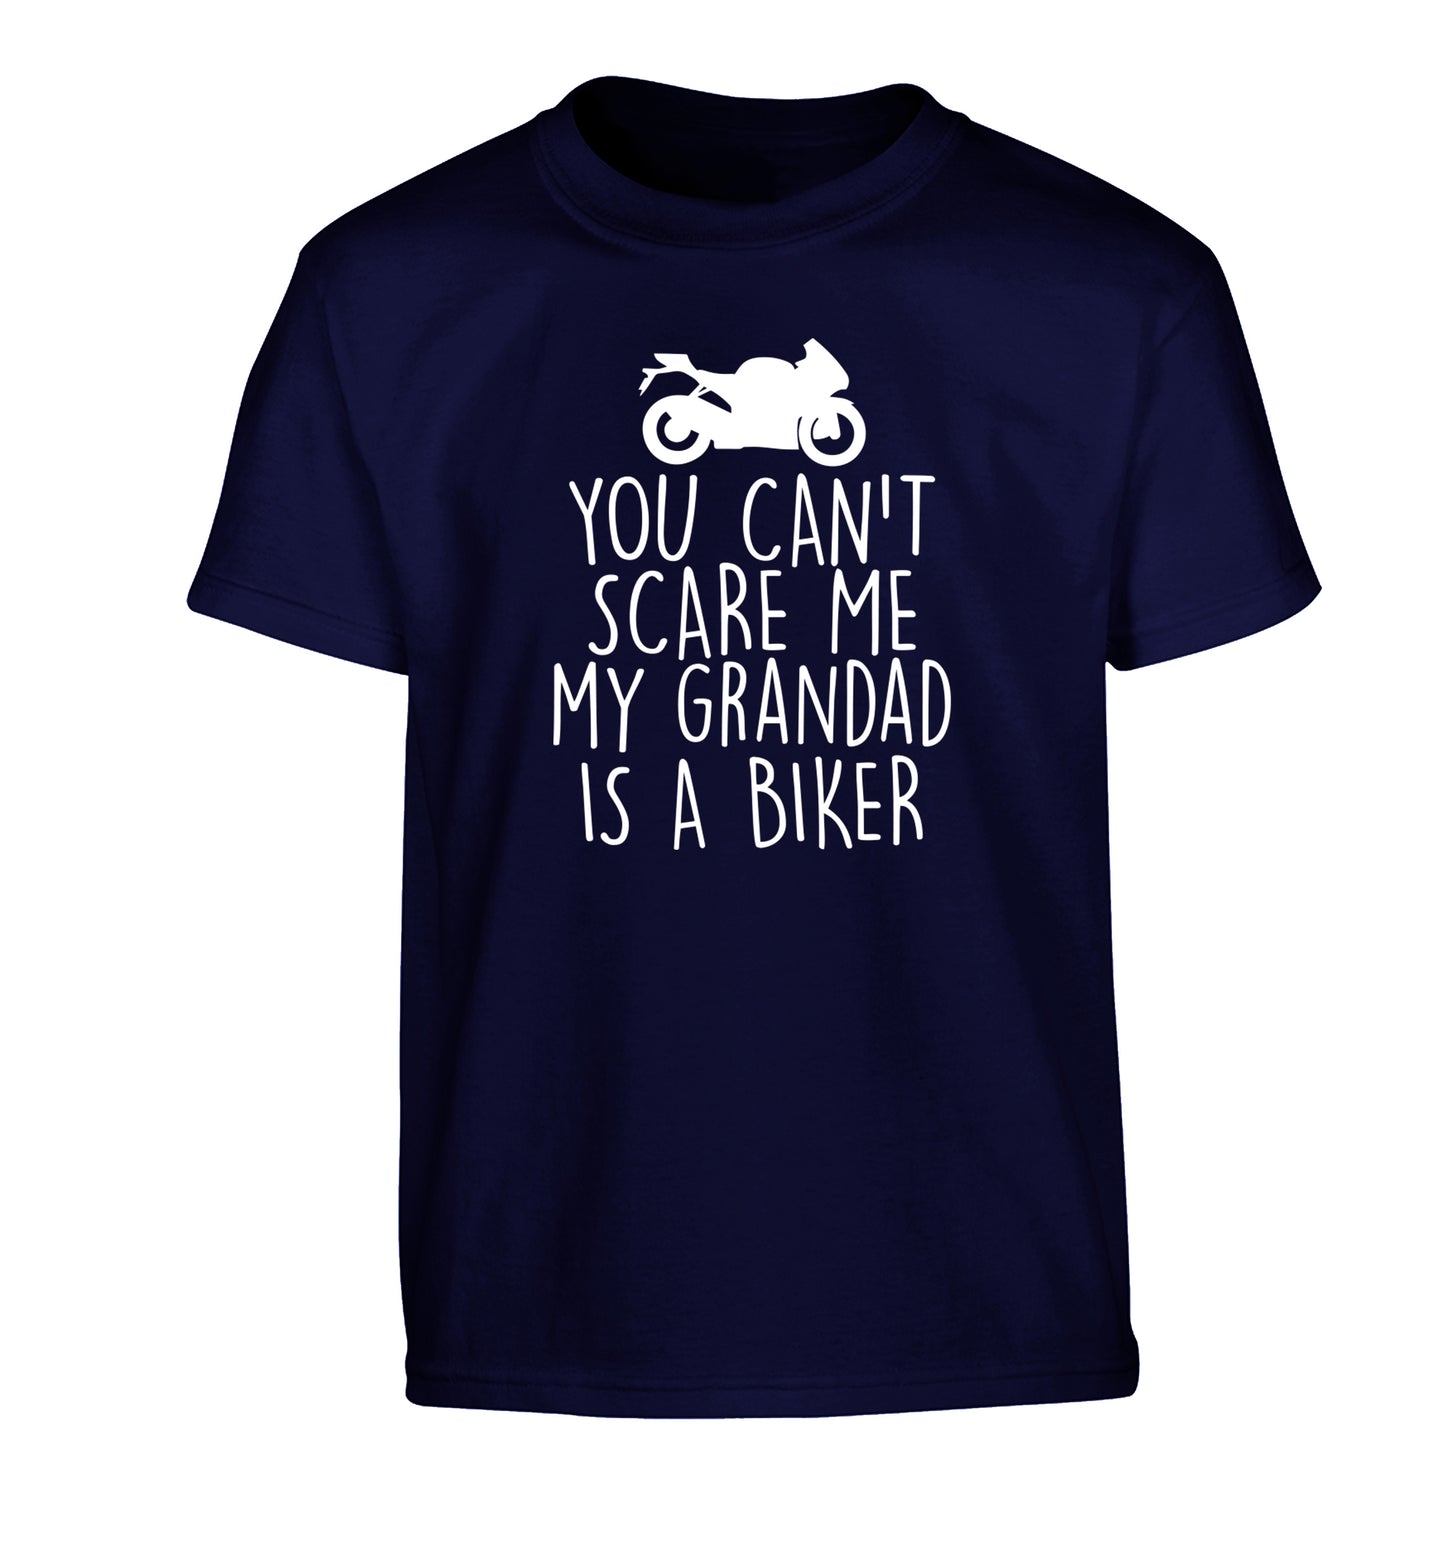 You can't scare me my grandad is a biker Children's navy Tshirt 12-13 Years